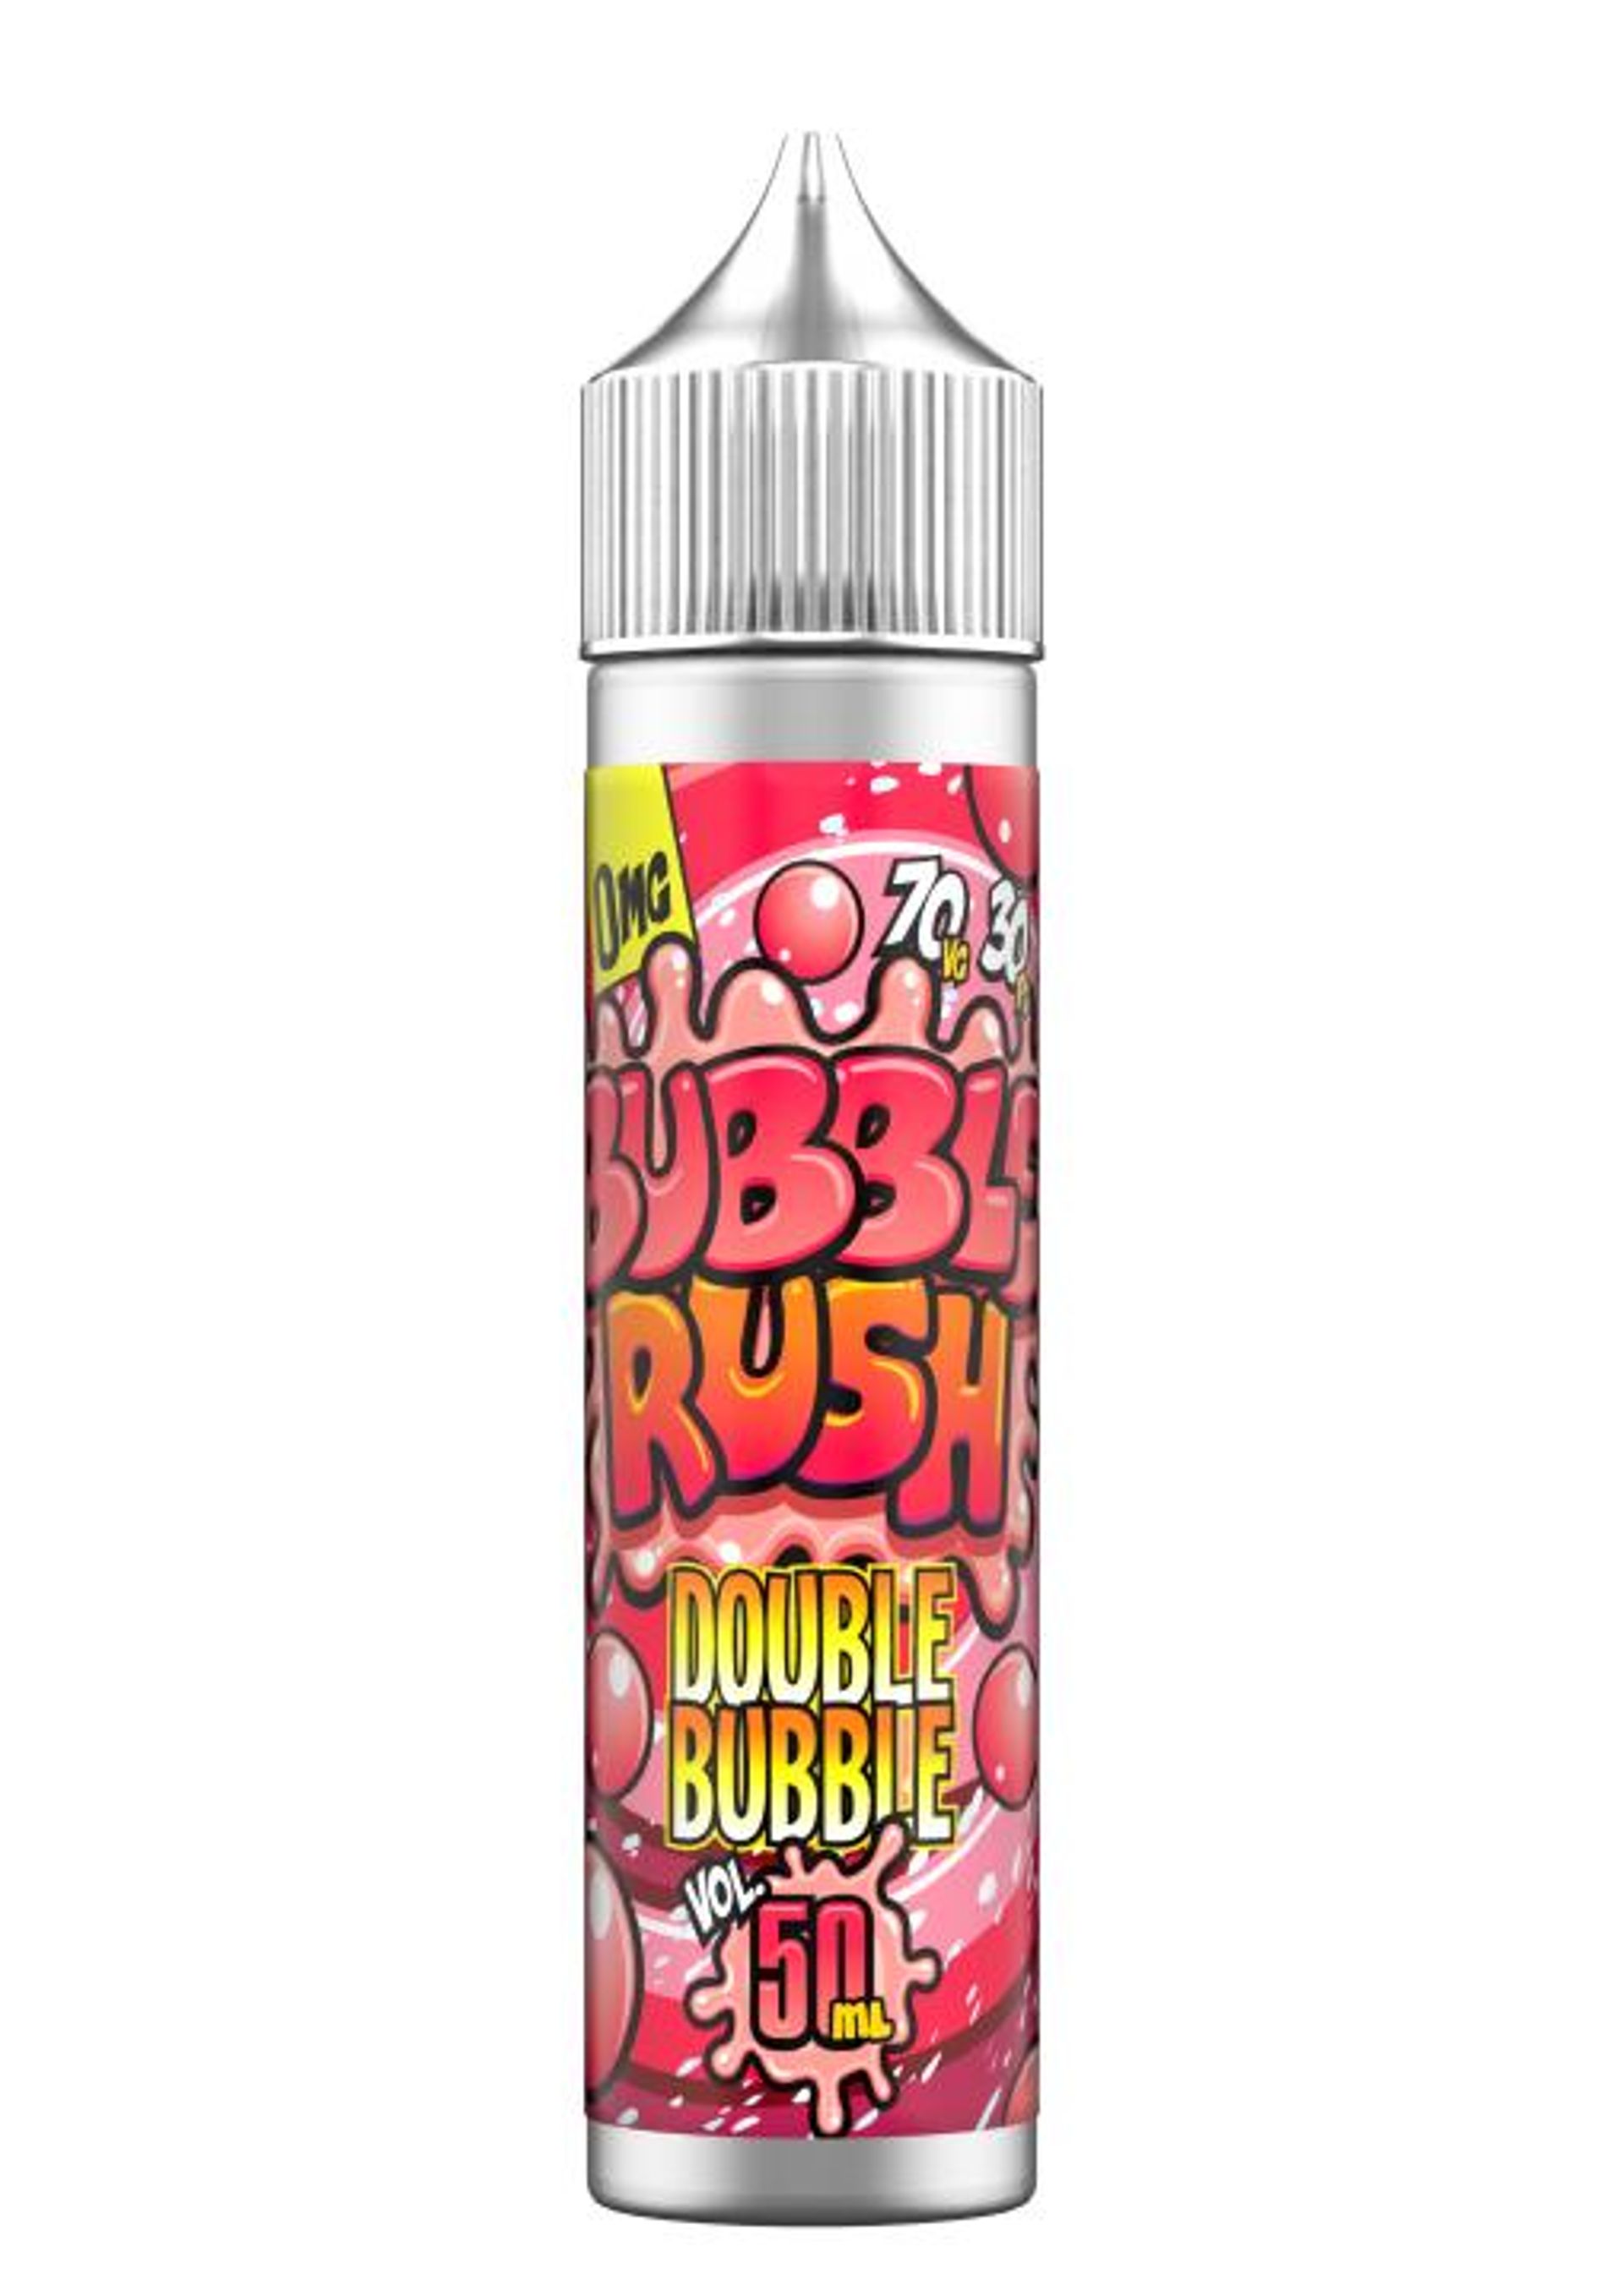 Image of Double Bubble by Bubble Rush